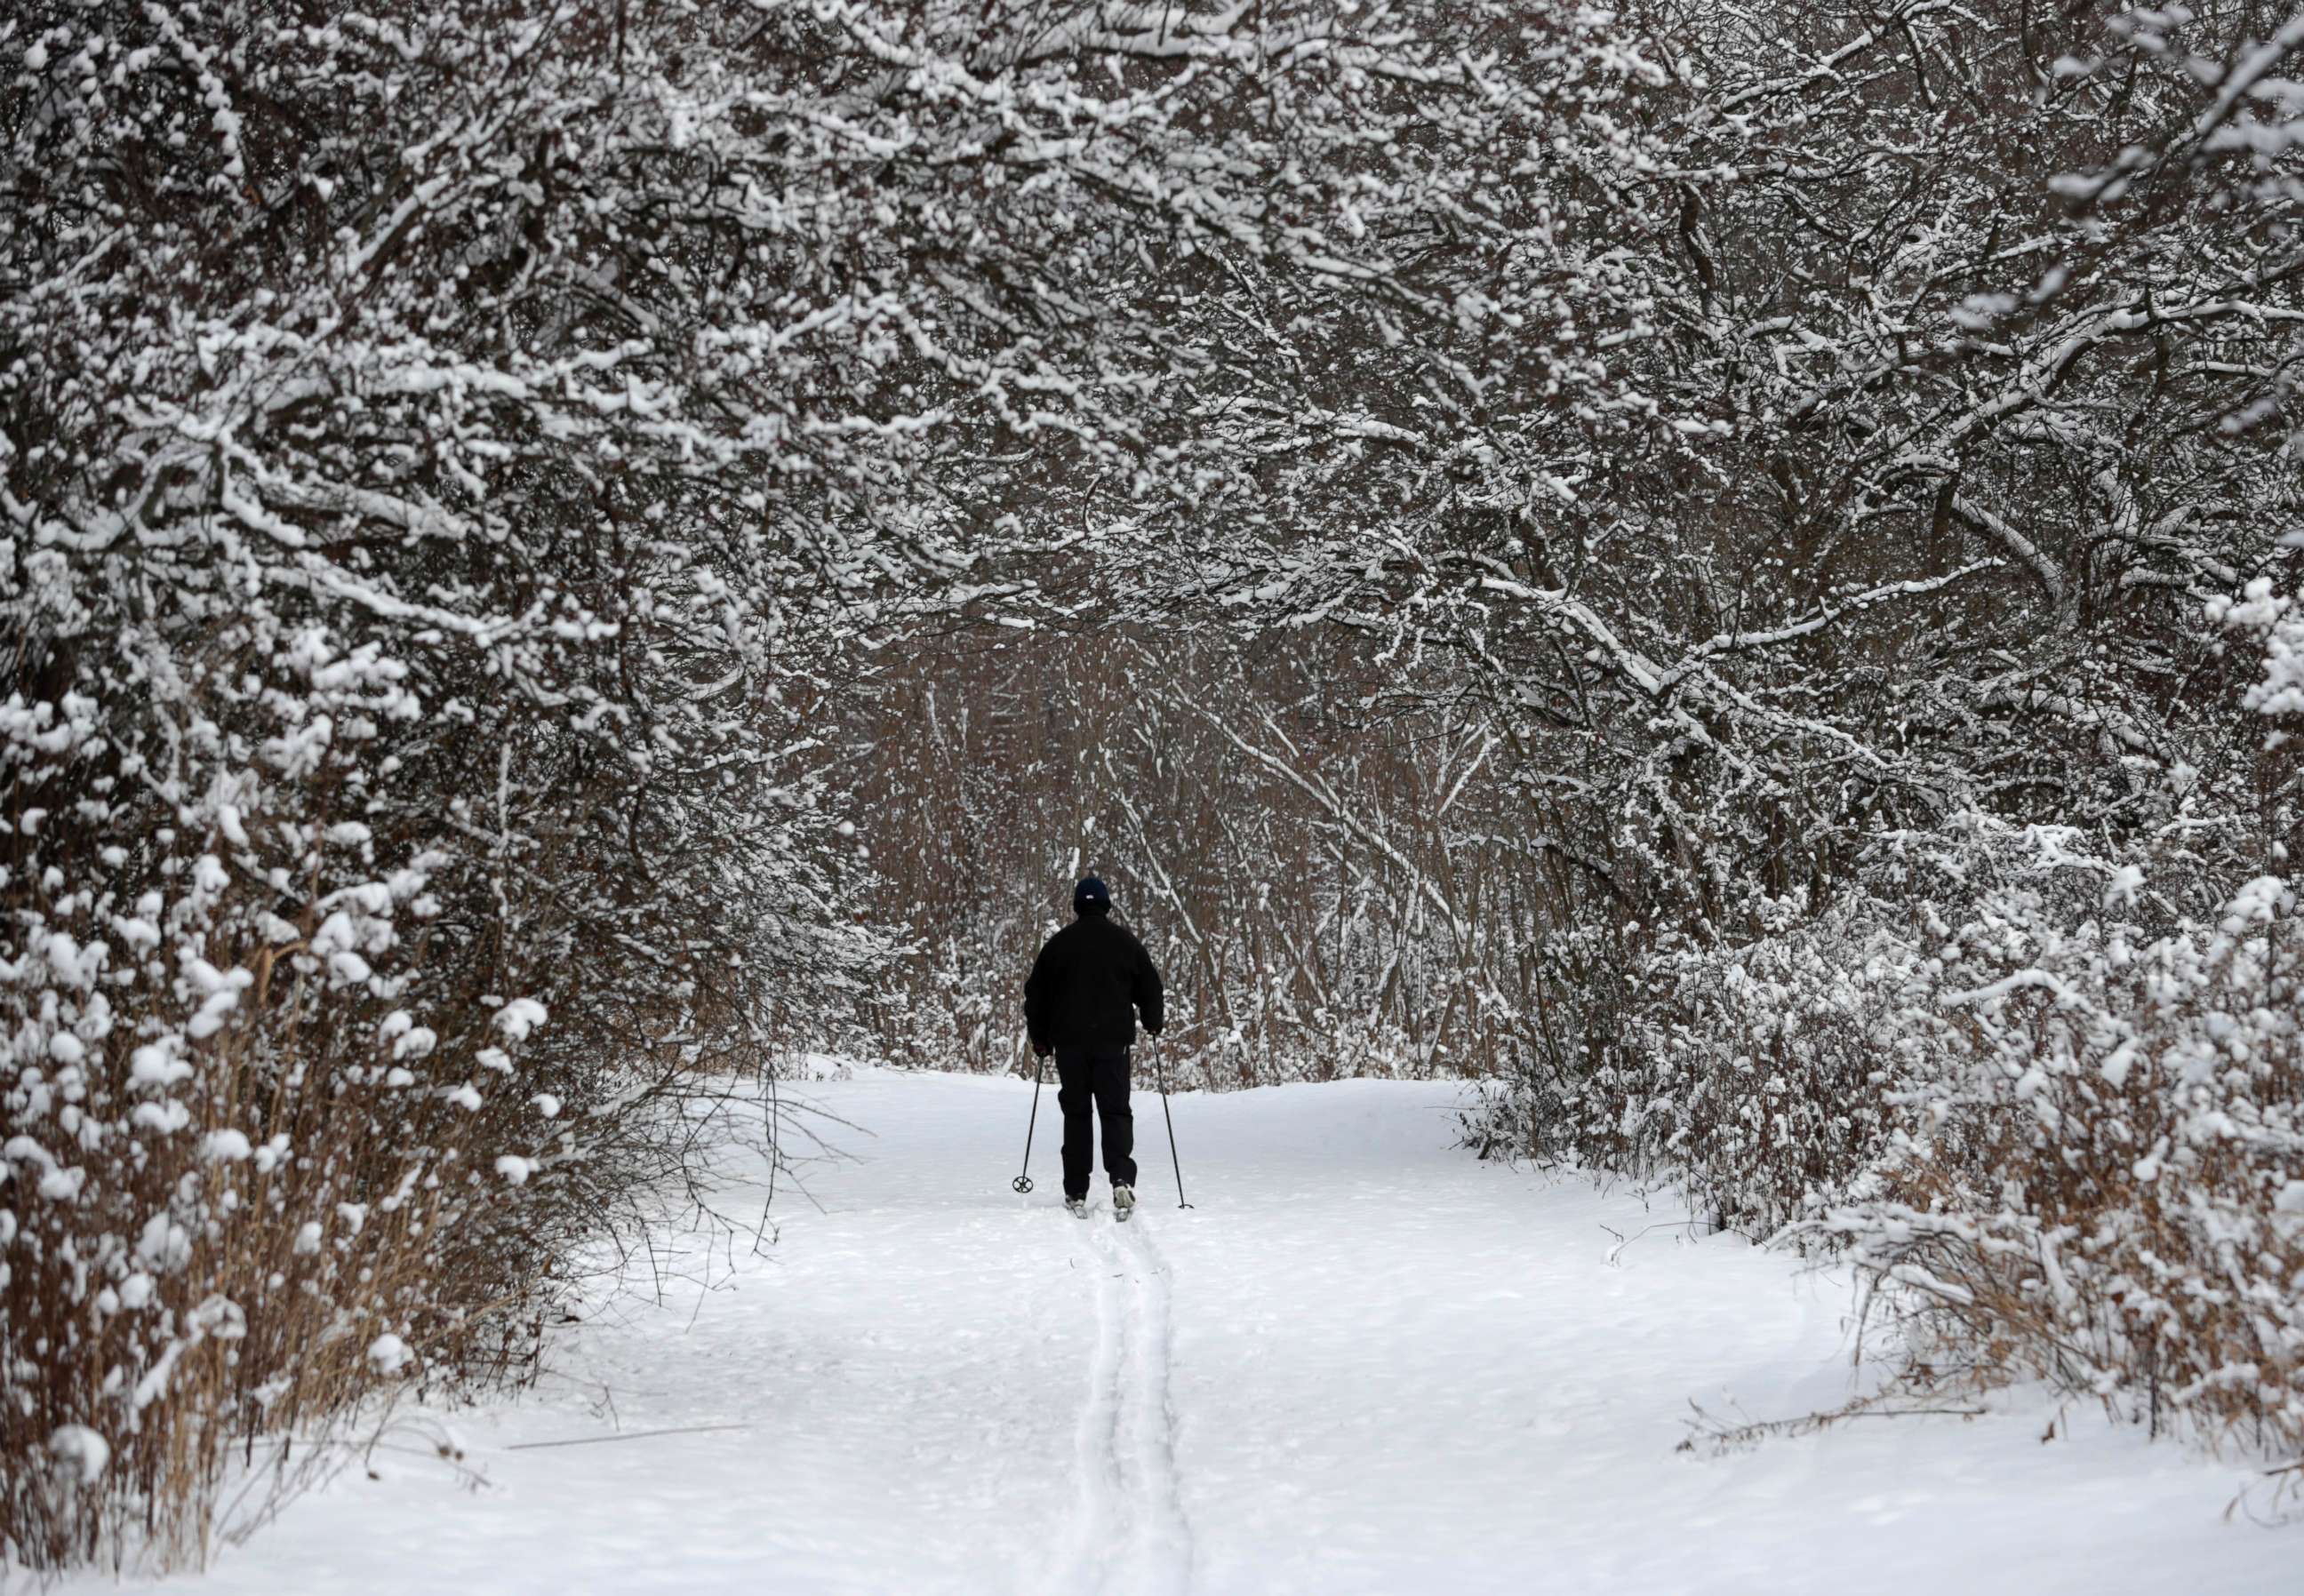 PHOTO: Joe Scharpf cross country skis on a trail after a fresh snowfall in the south chagrin reservation of the Cleveland Metroparks, Dec. 28, 2017, in Moreland Hills, Ohio. 